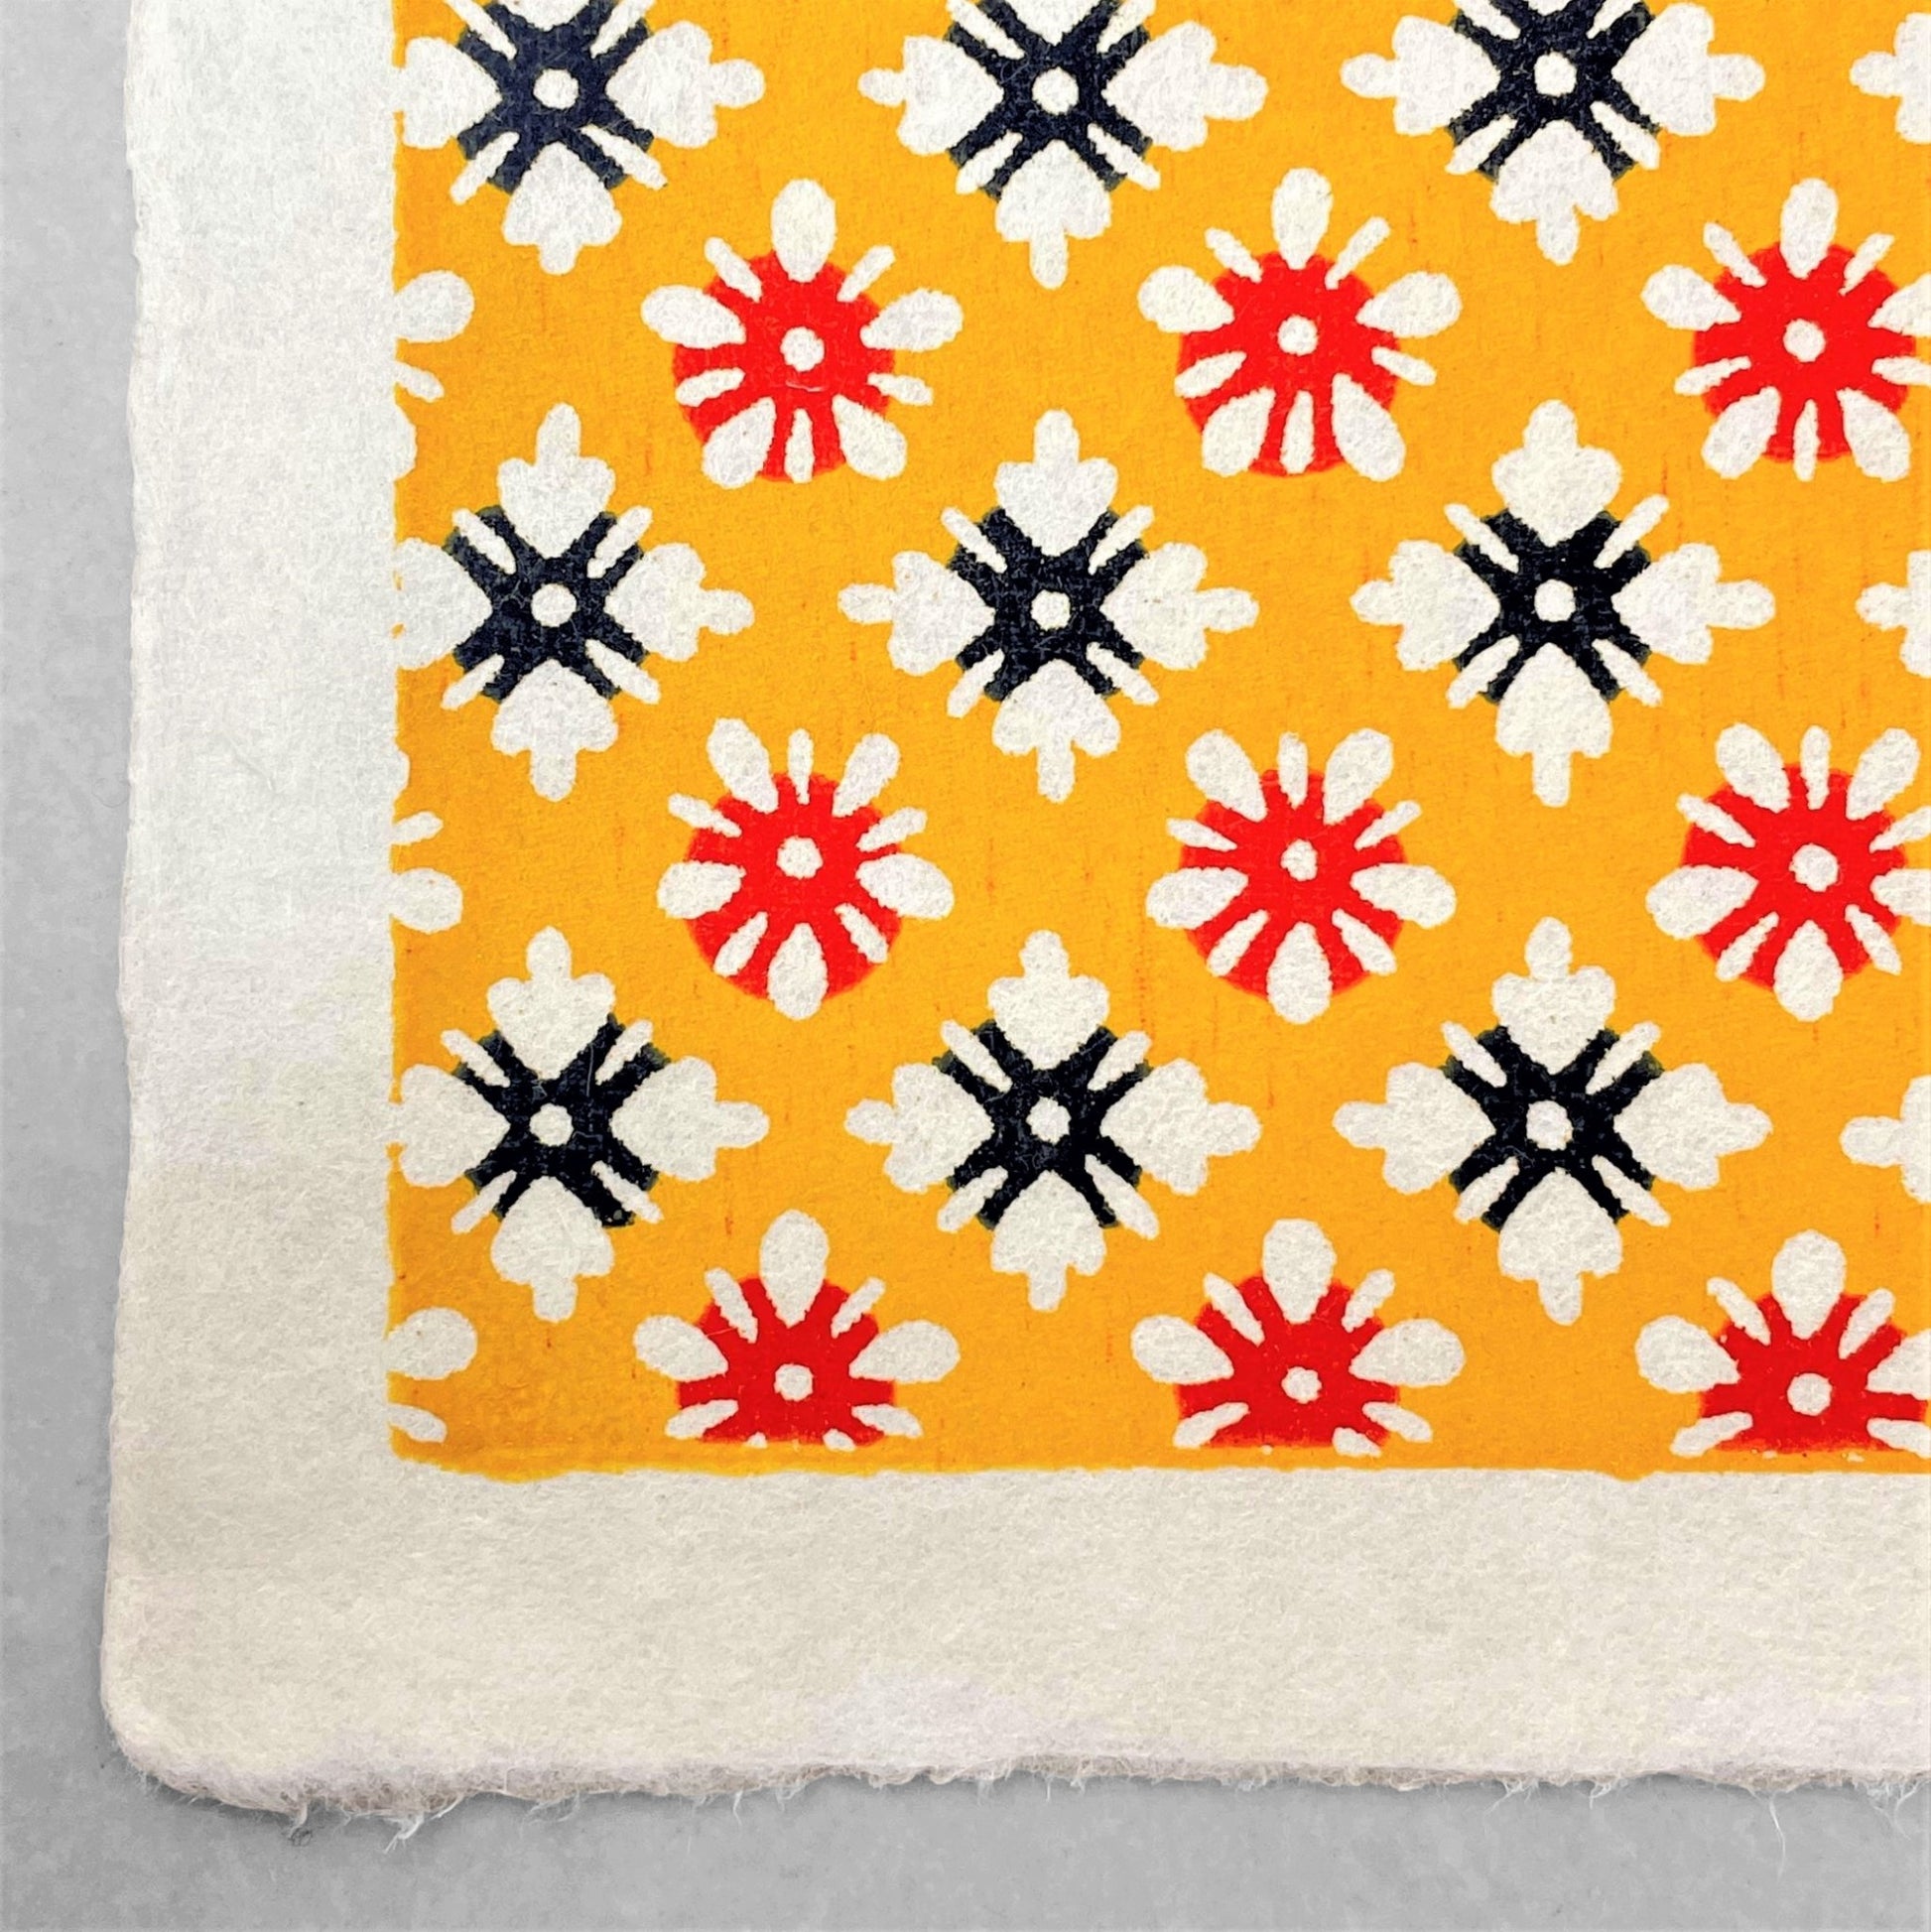 japanese stencil-dyed handmade paper with small scale floral repeat pattern on yellow backdrop